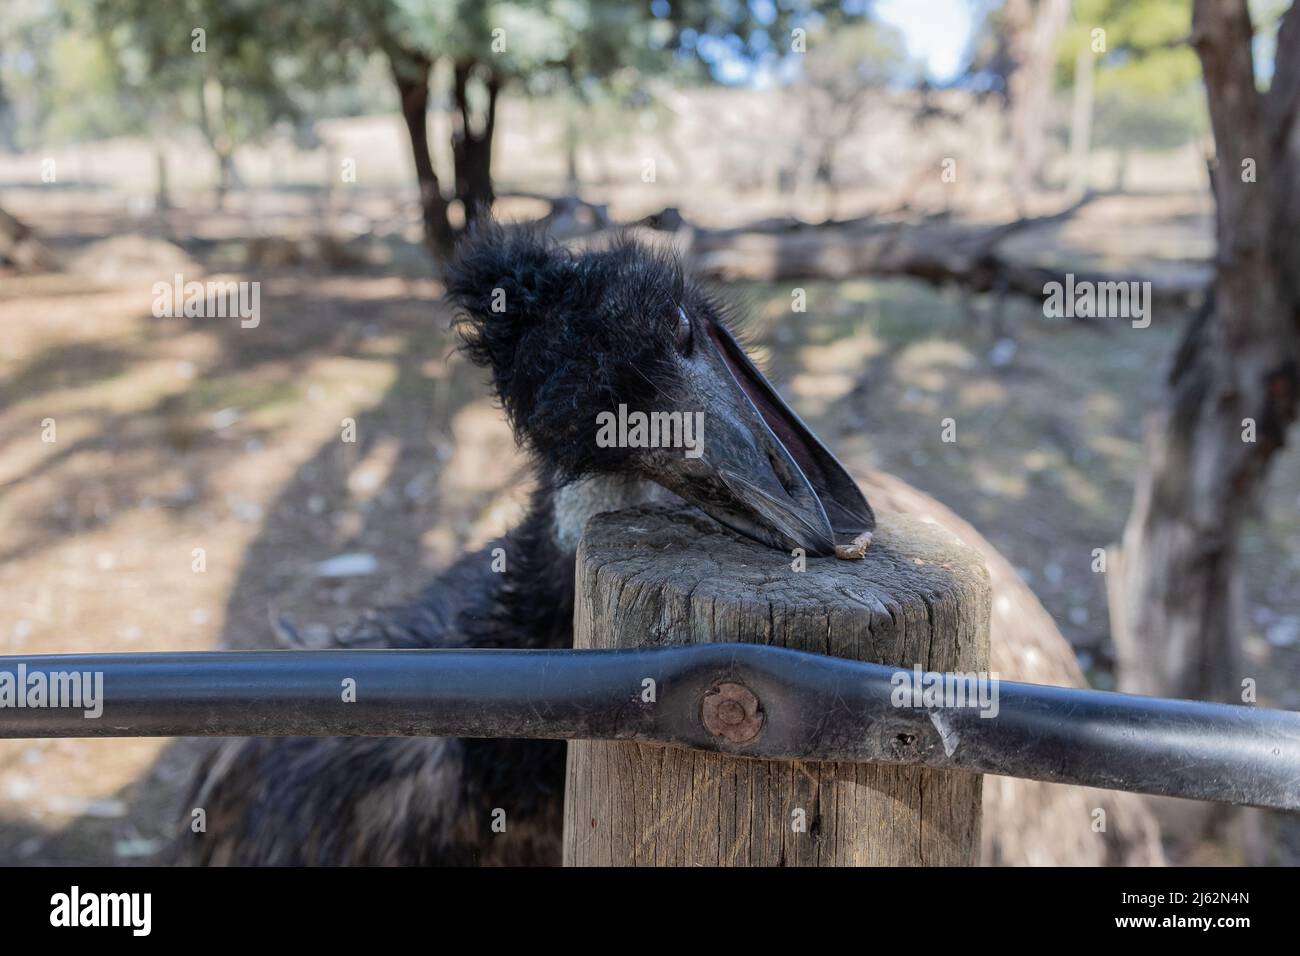 Close up of an Australian Emu tilting its head to eat food from a fence post. This large flightless bird is native to Australia. Stock Photo